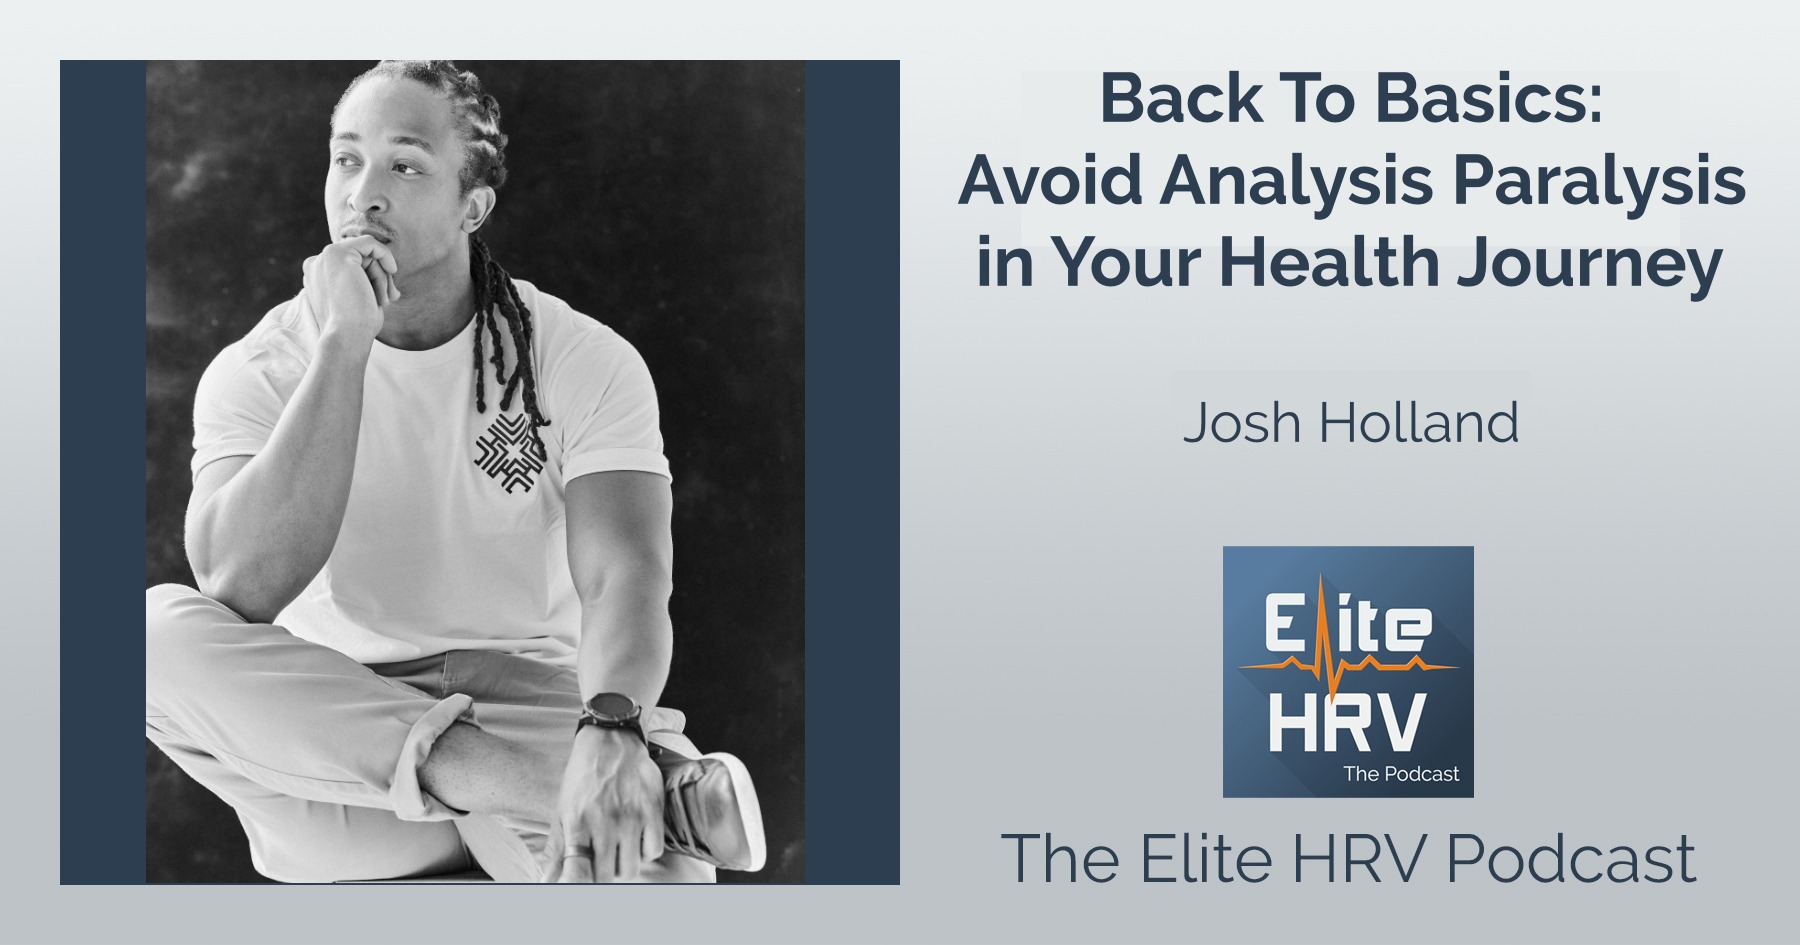 Back To Basics: Avoid Analysis Paralysis in Your Health Journey